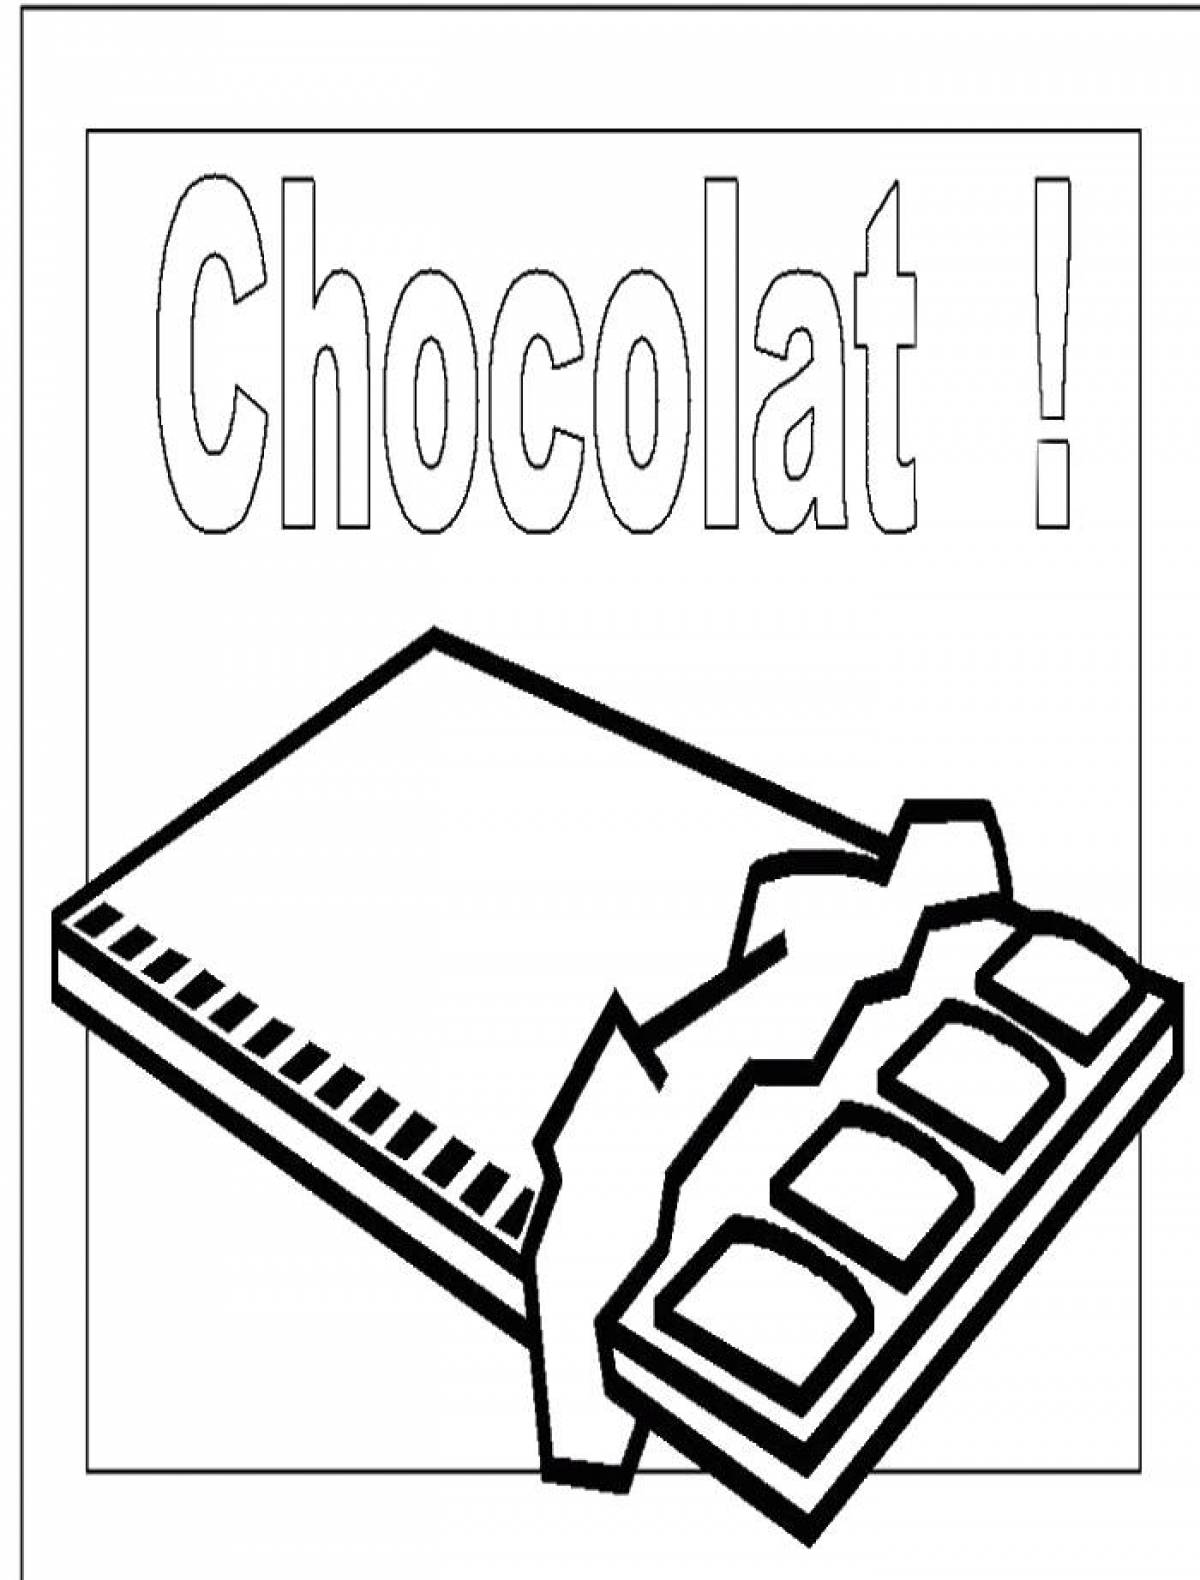 Nutritious chocolate coloring page